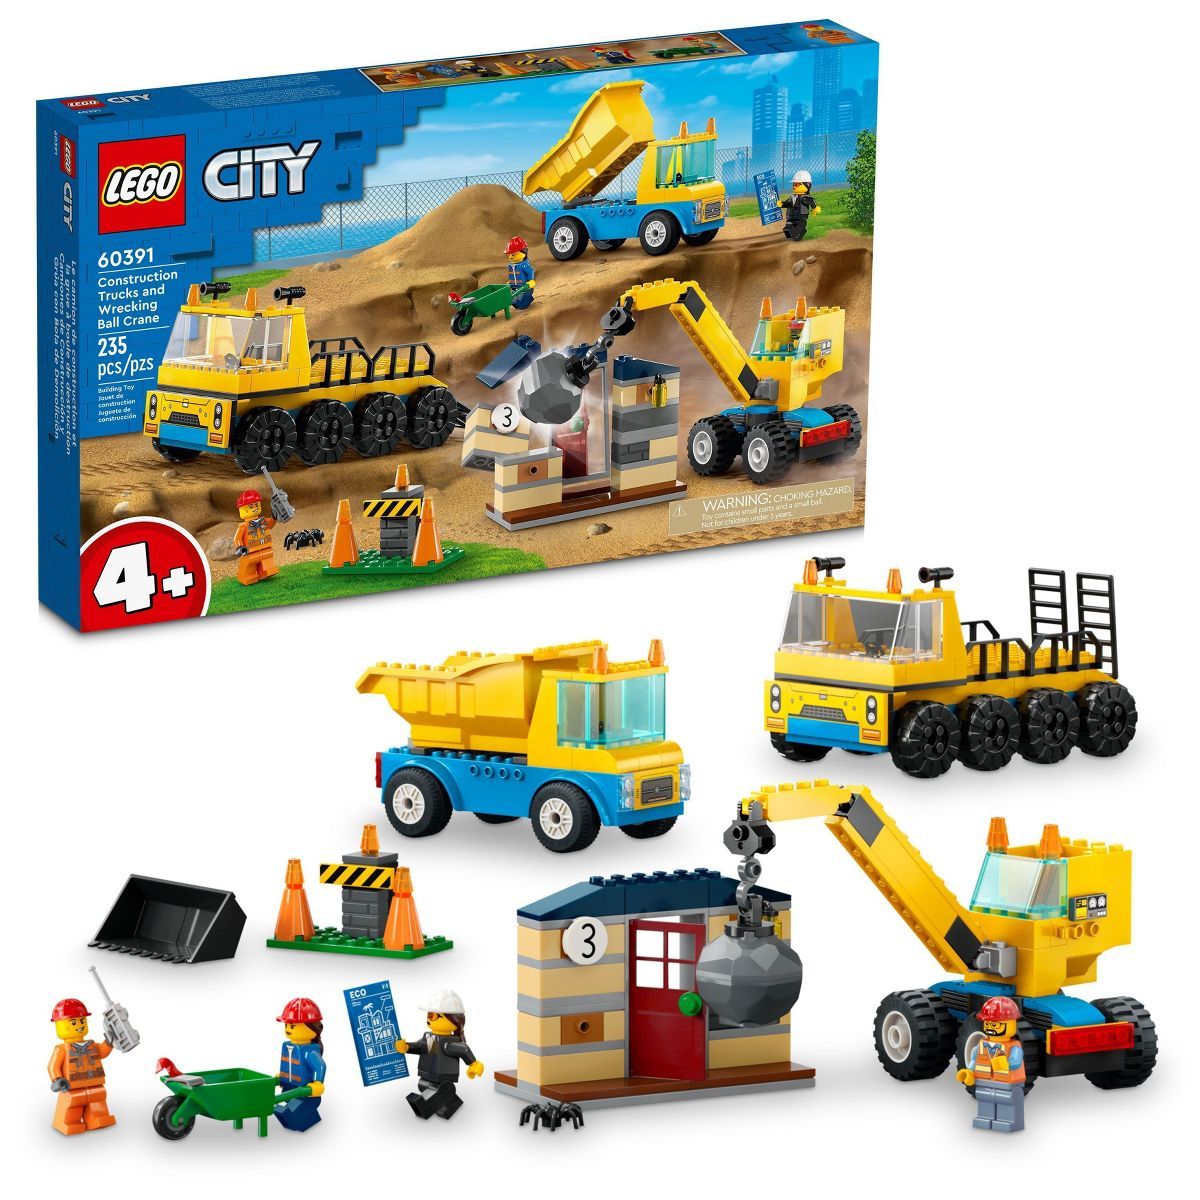 LEGO City Construction Trucks and Wrecking Ball Crane Building Toy Set 60391 | Target